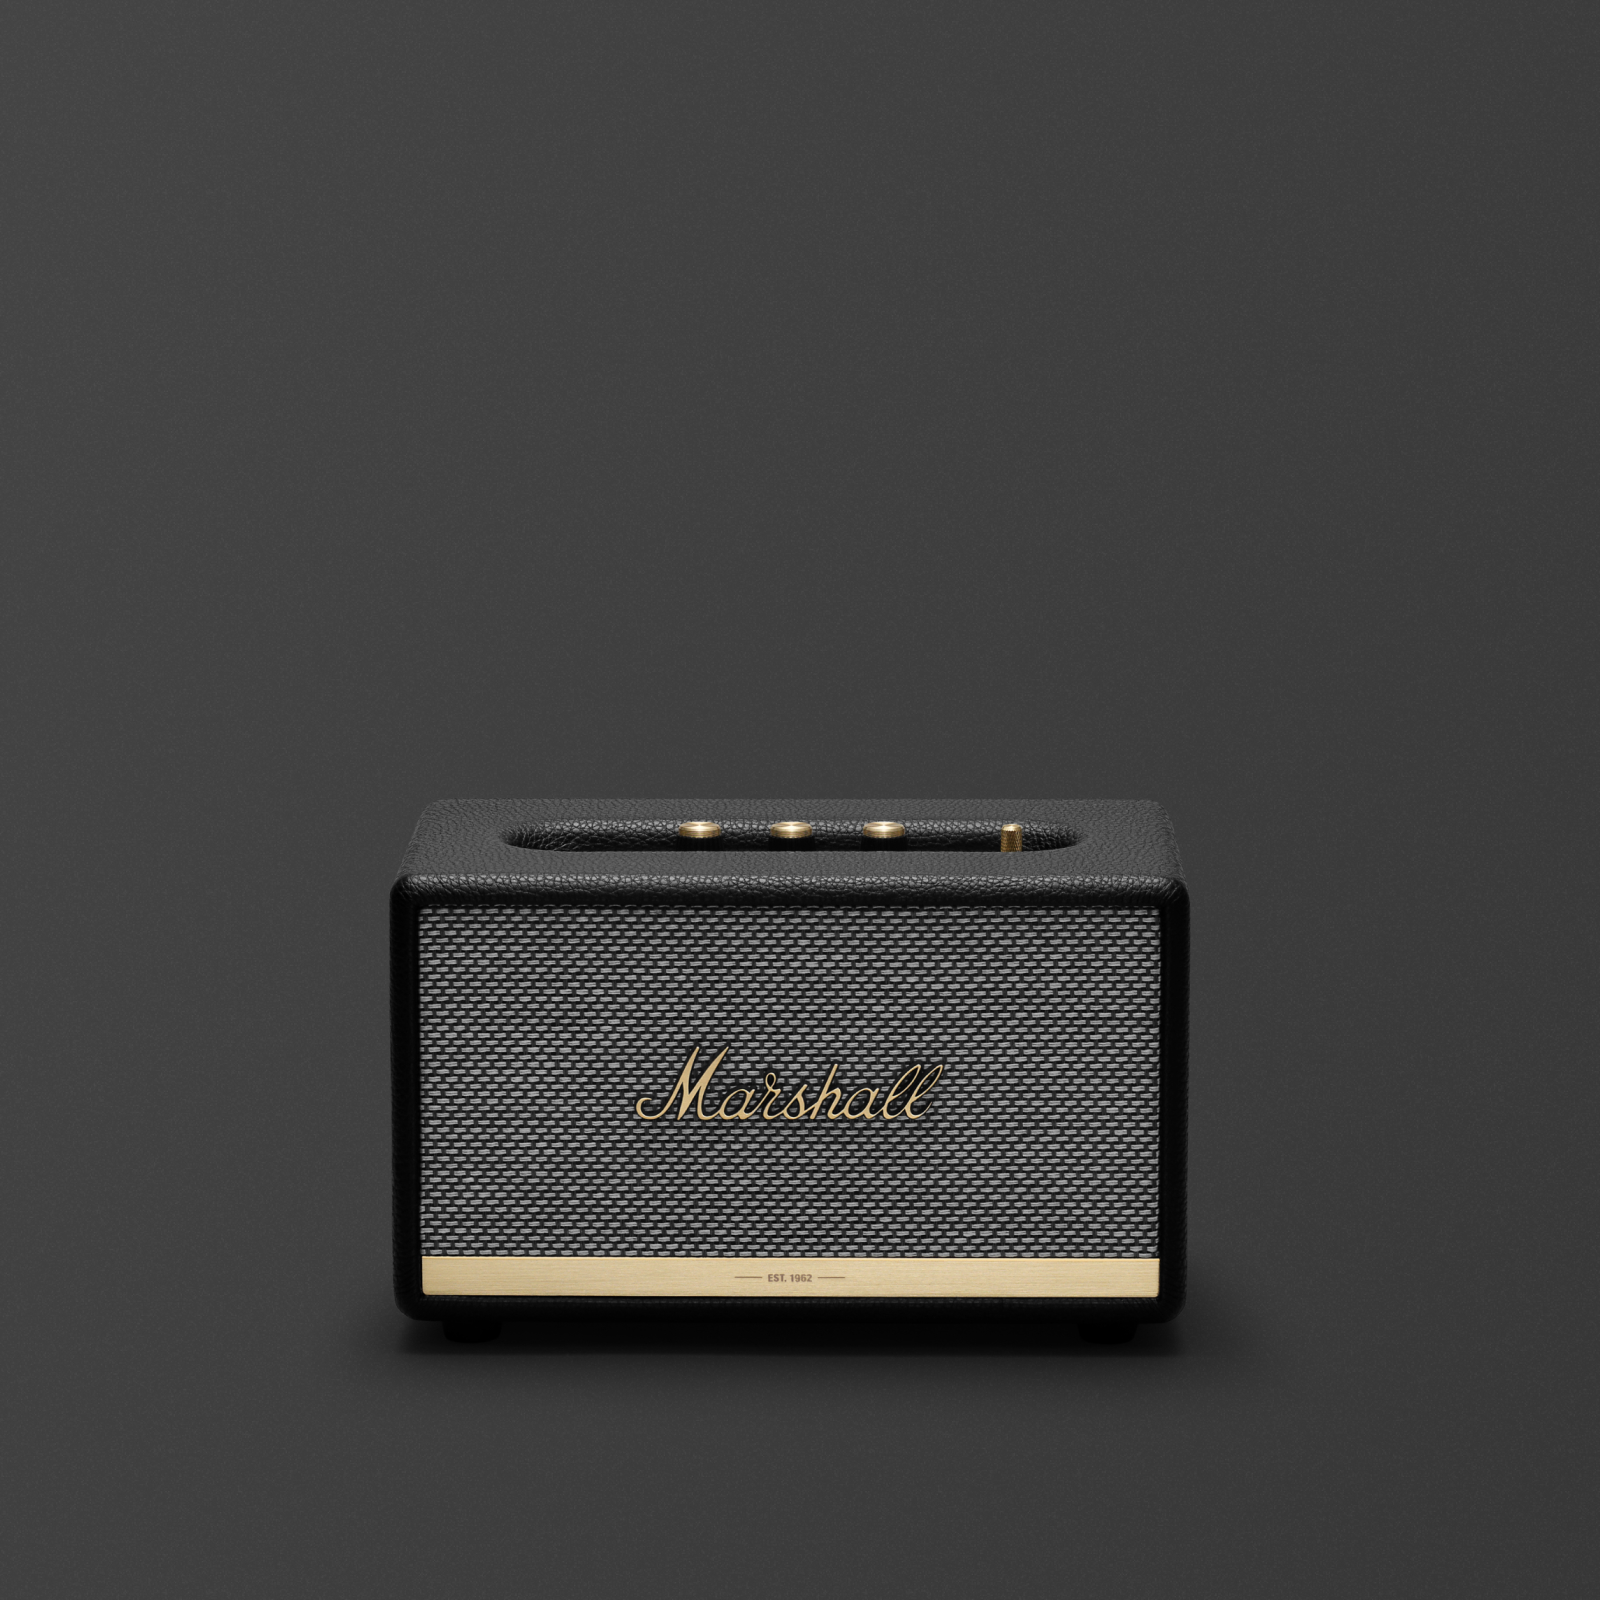 Front view image of the Marshall Acton II Black Speaker.